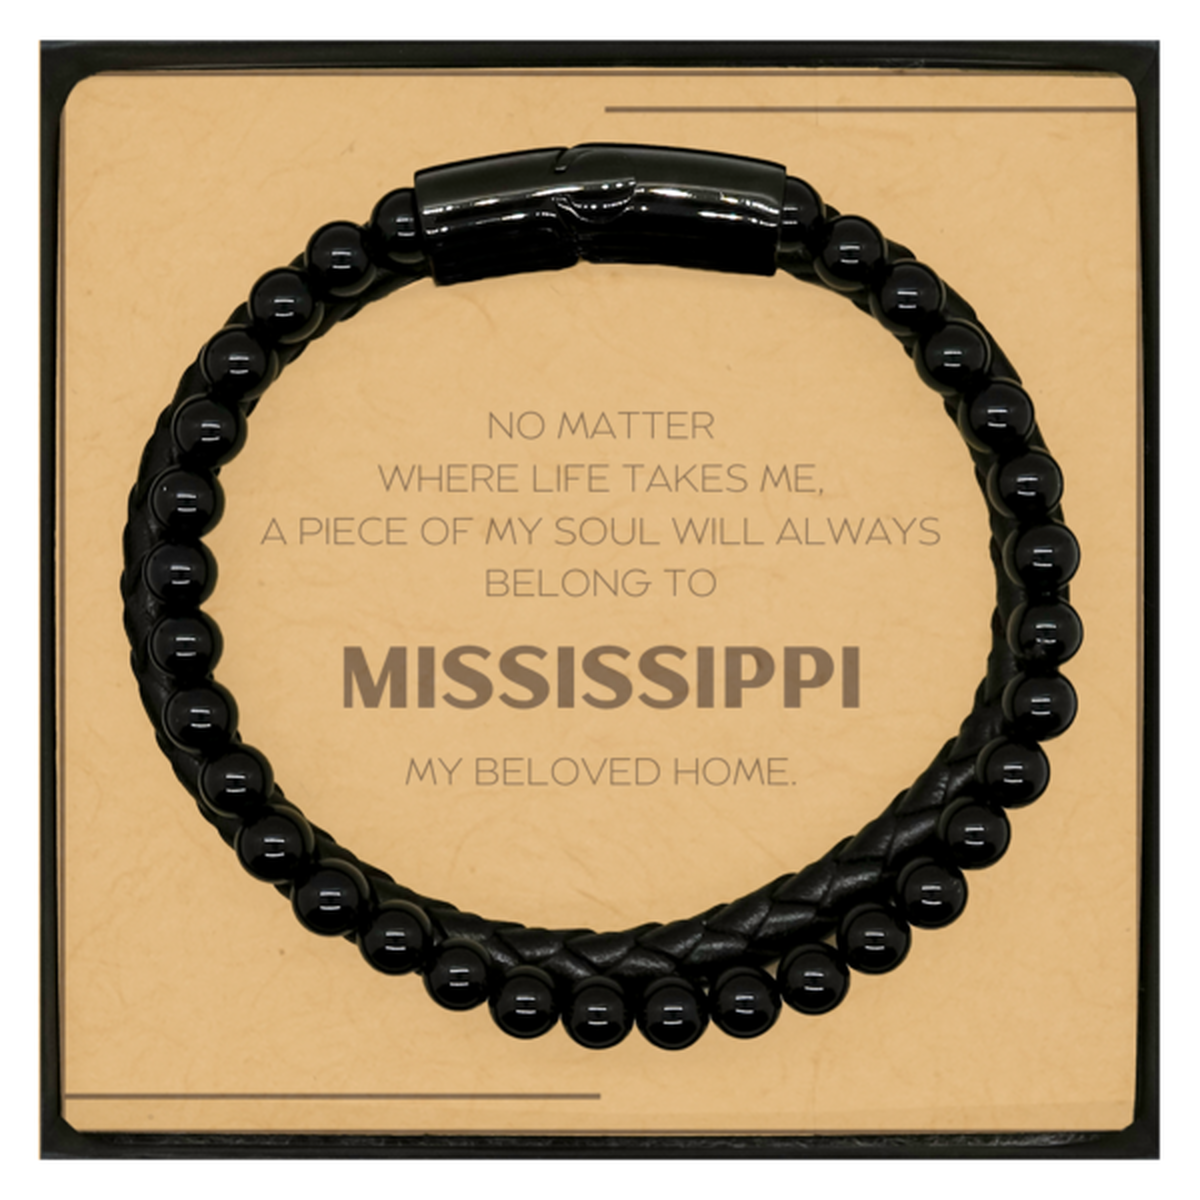 Love Mississippi State Gifts, My soul will always belong to Mississippi, Proud Stone Leather Bracelets, Birthday Christmas Unique Gifts For Mississippi Men, Women, Friends